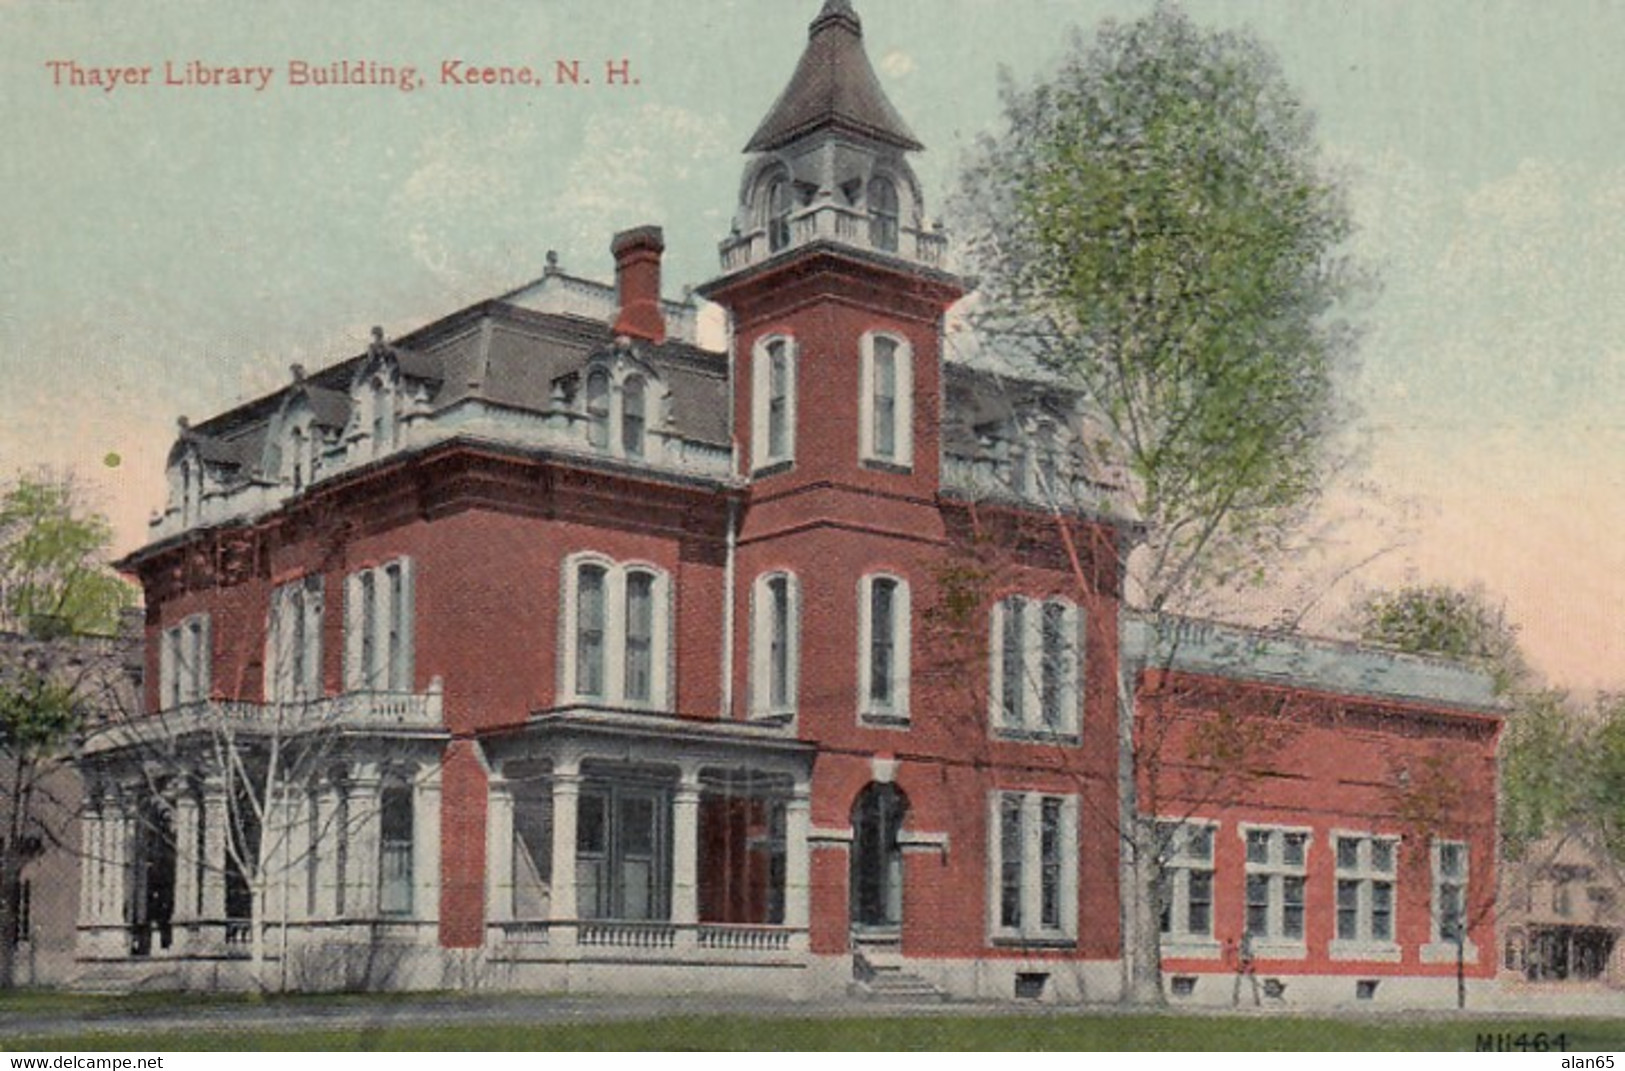 Keene New Hampshire, Thayer Library Building Architecture, C1900s/10s Vintage Postcard - Bibliotecas